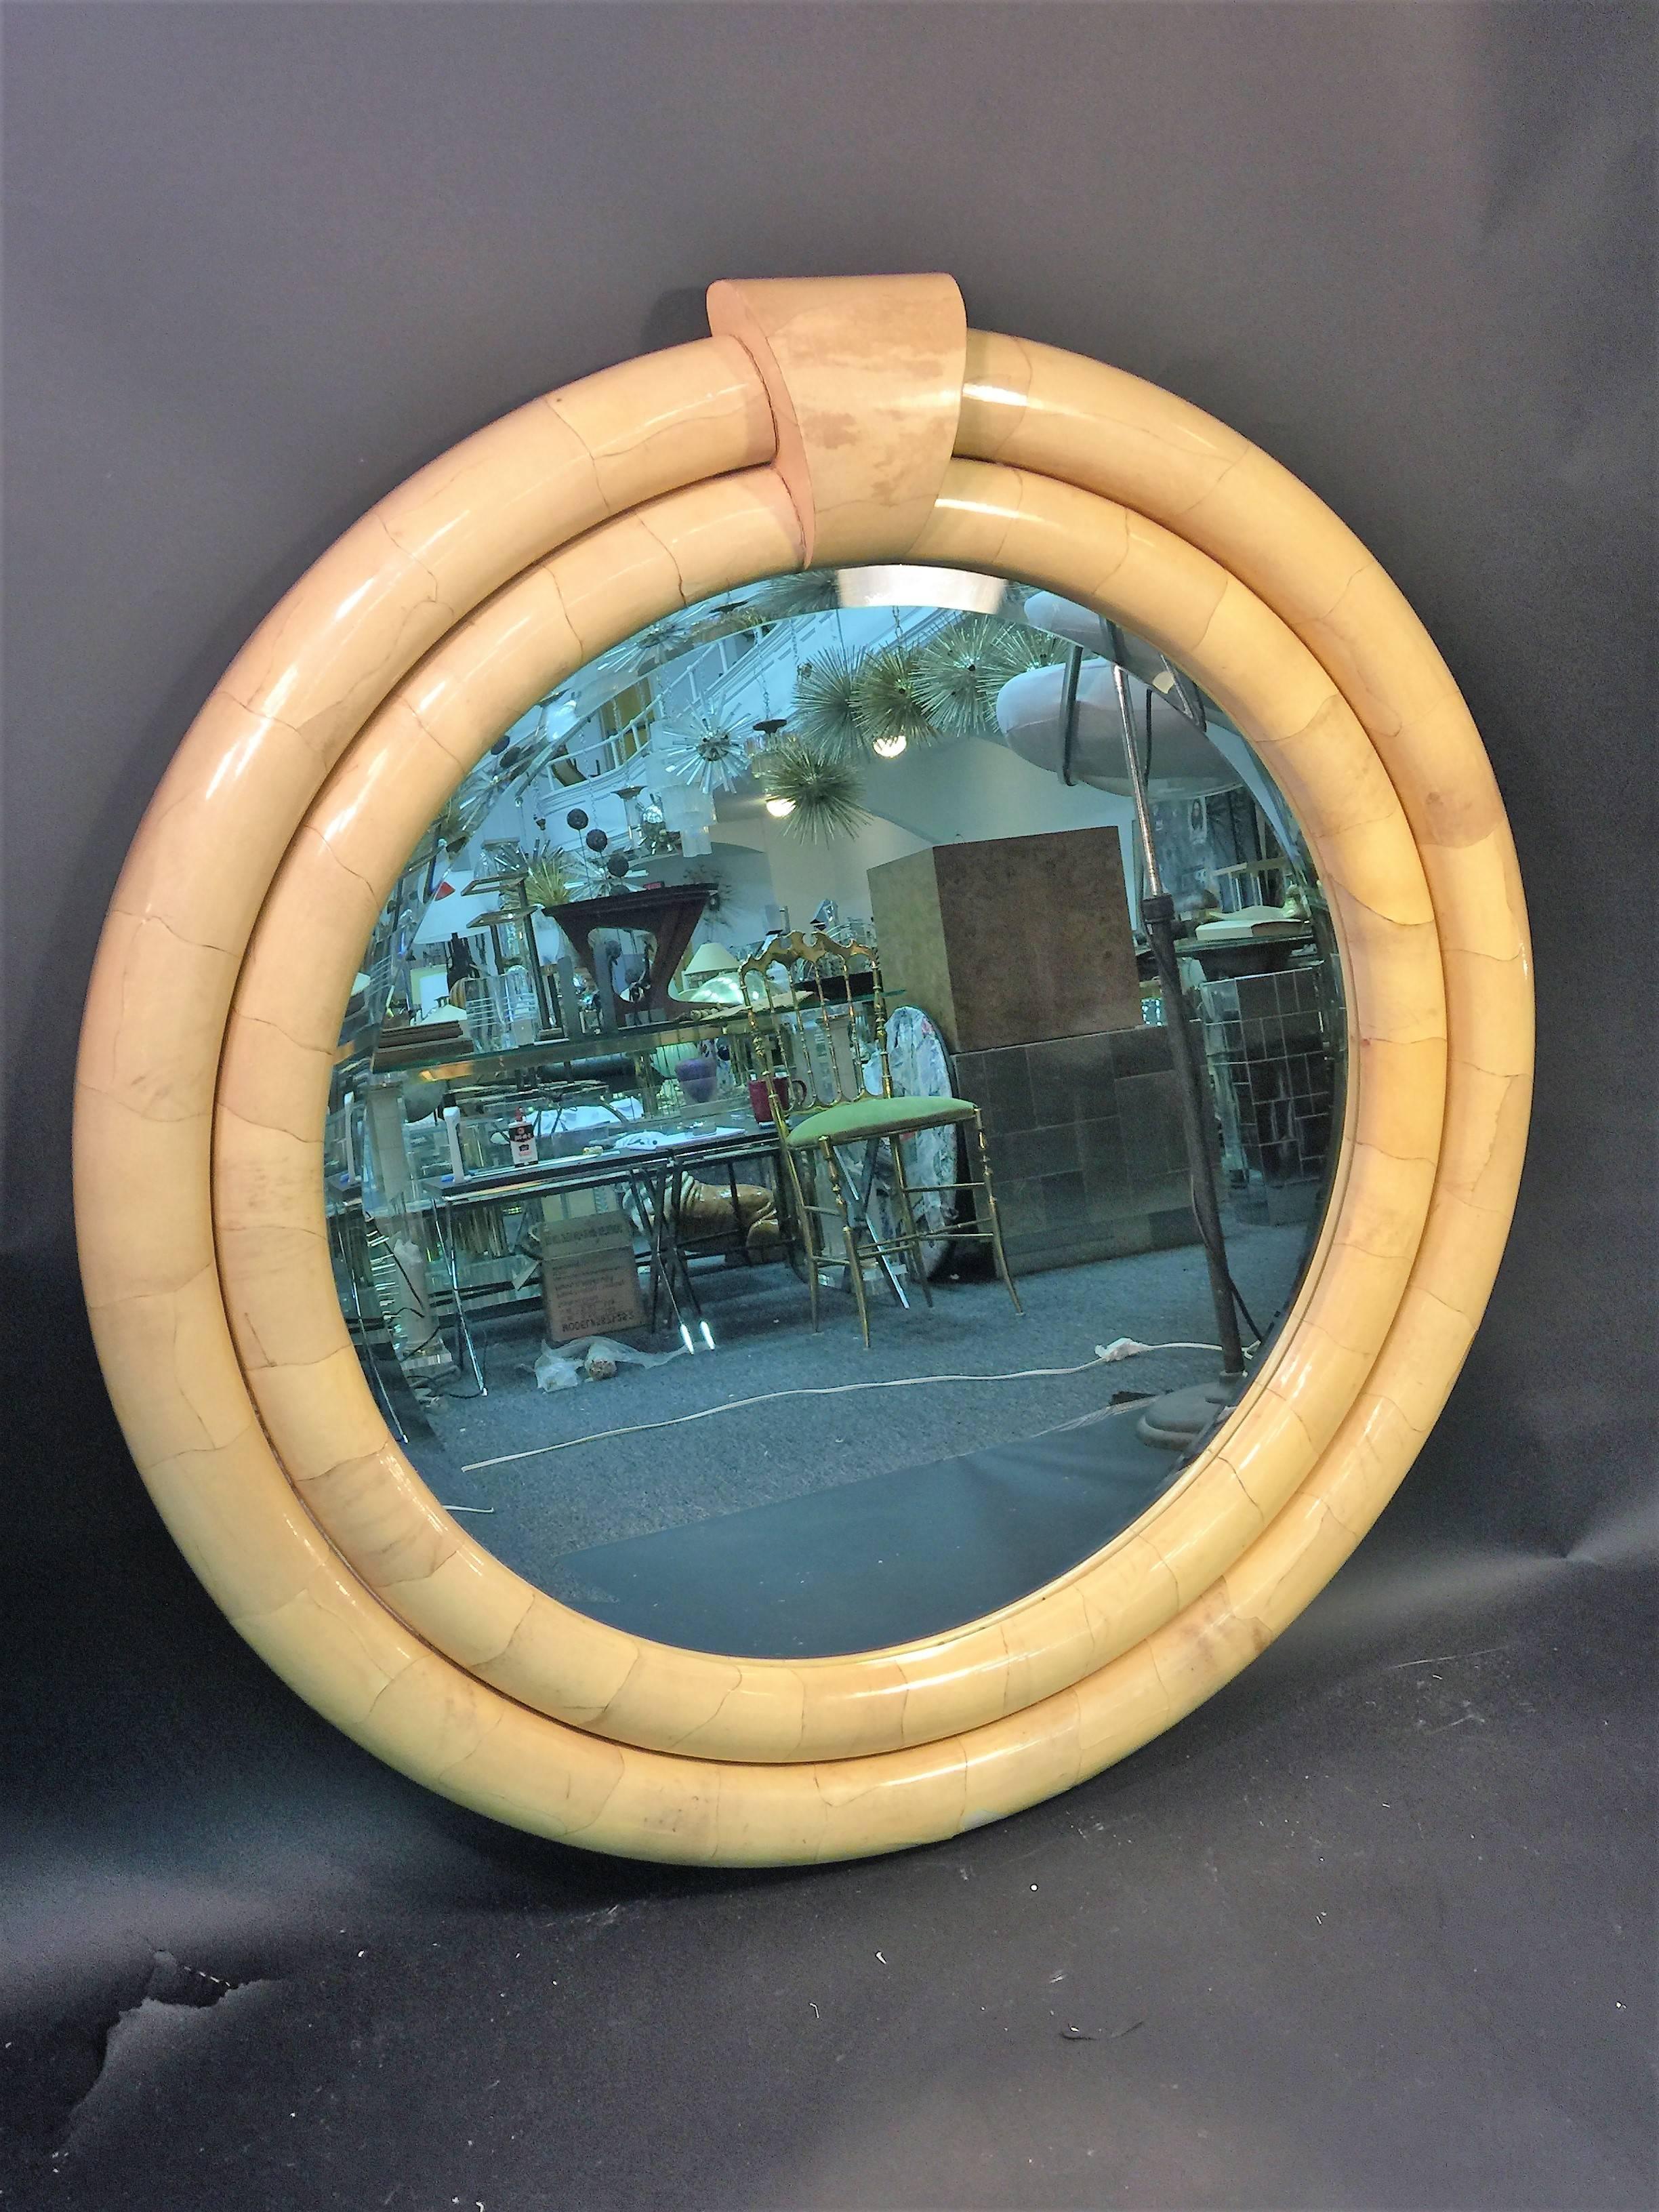 Beautiful round double levelled goatskin mirror beautiful deep yellow hued mirror with dramatic bevelled round mirror. Fantastic form and design that would be incredible in a high end modern interior. The depth of the mirror is 3 1/2